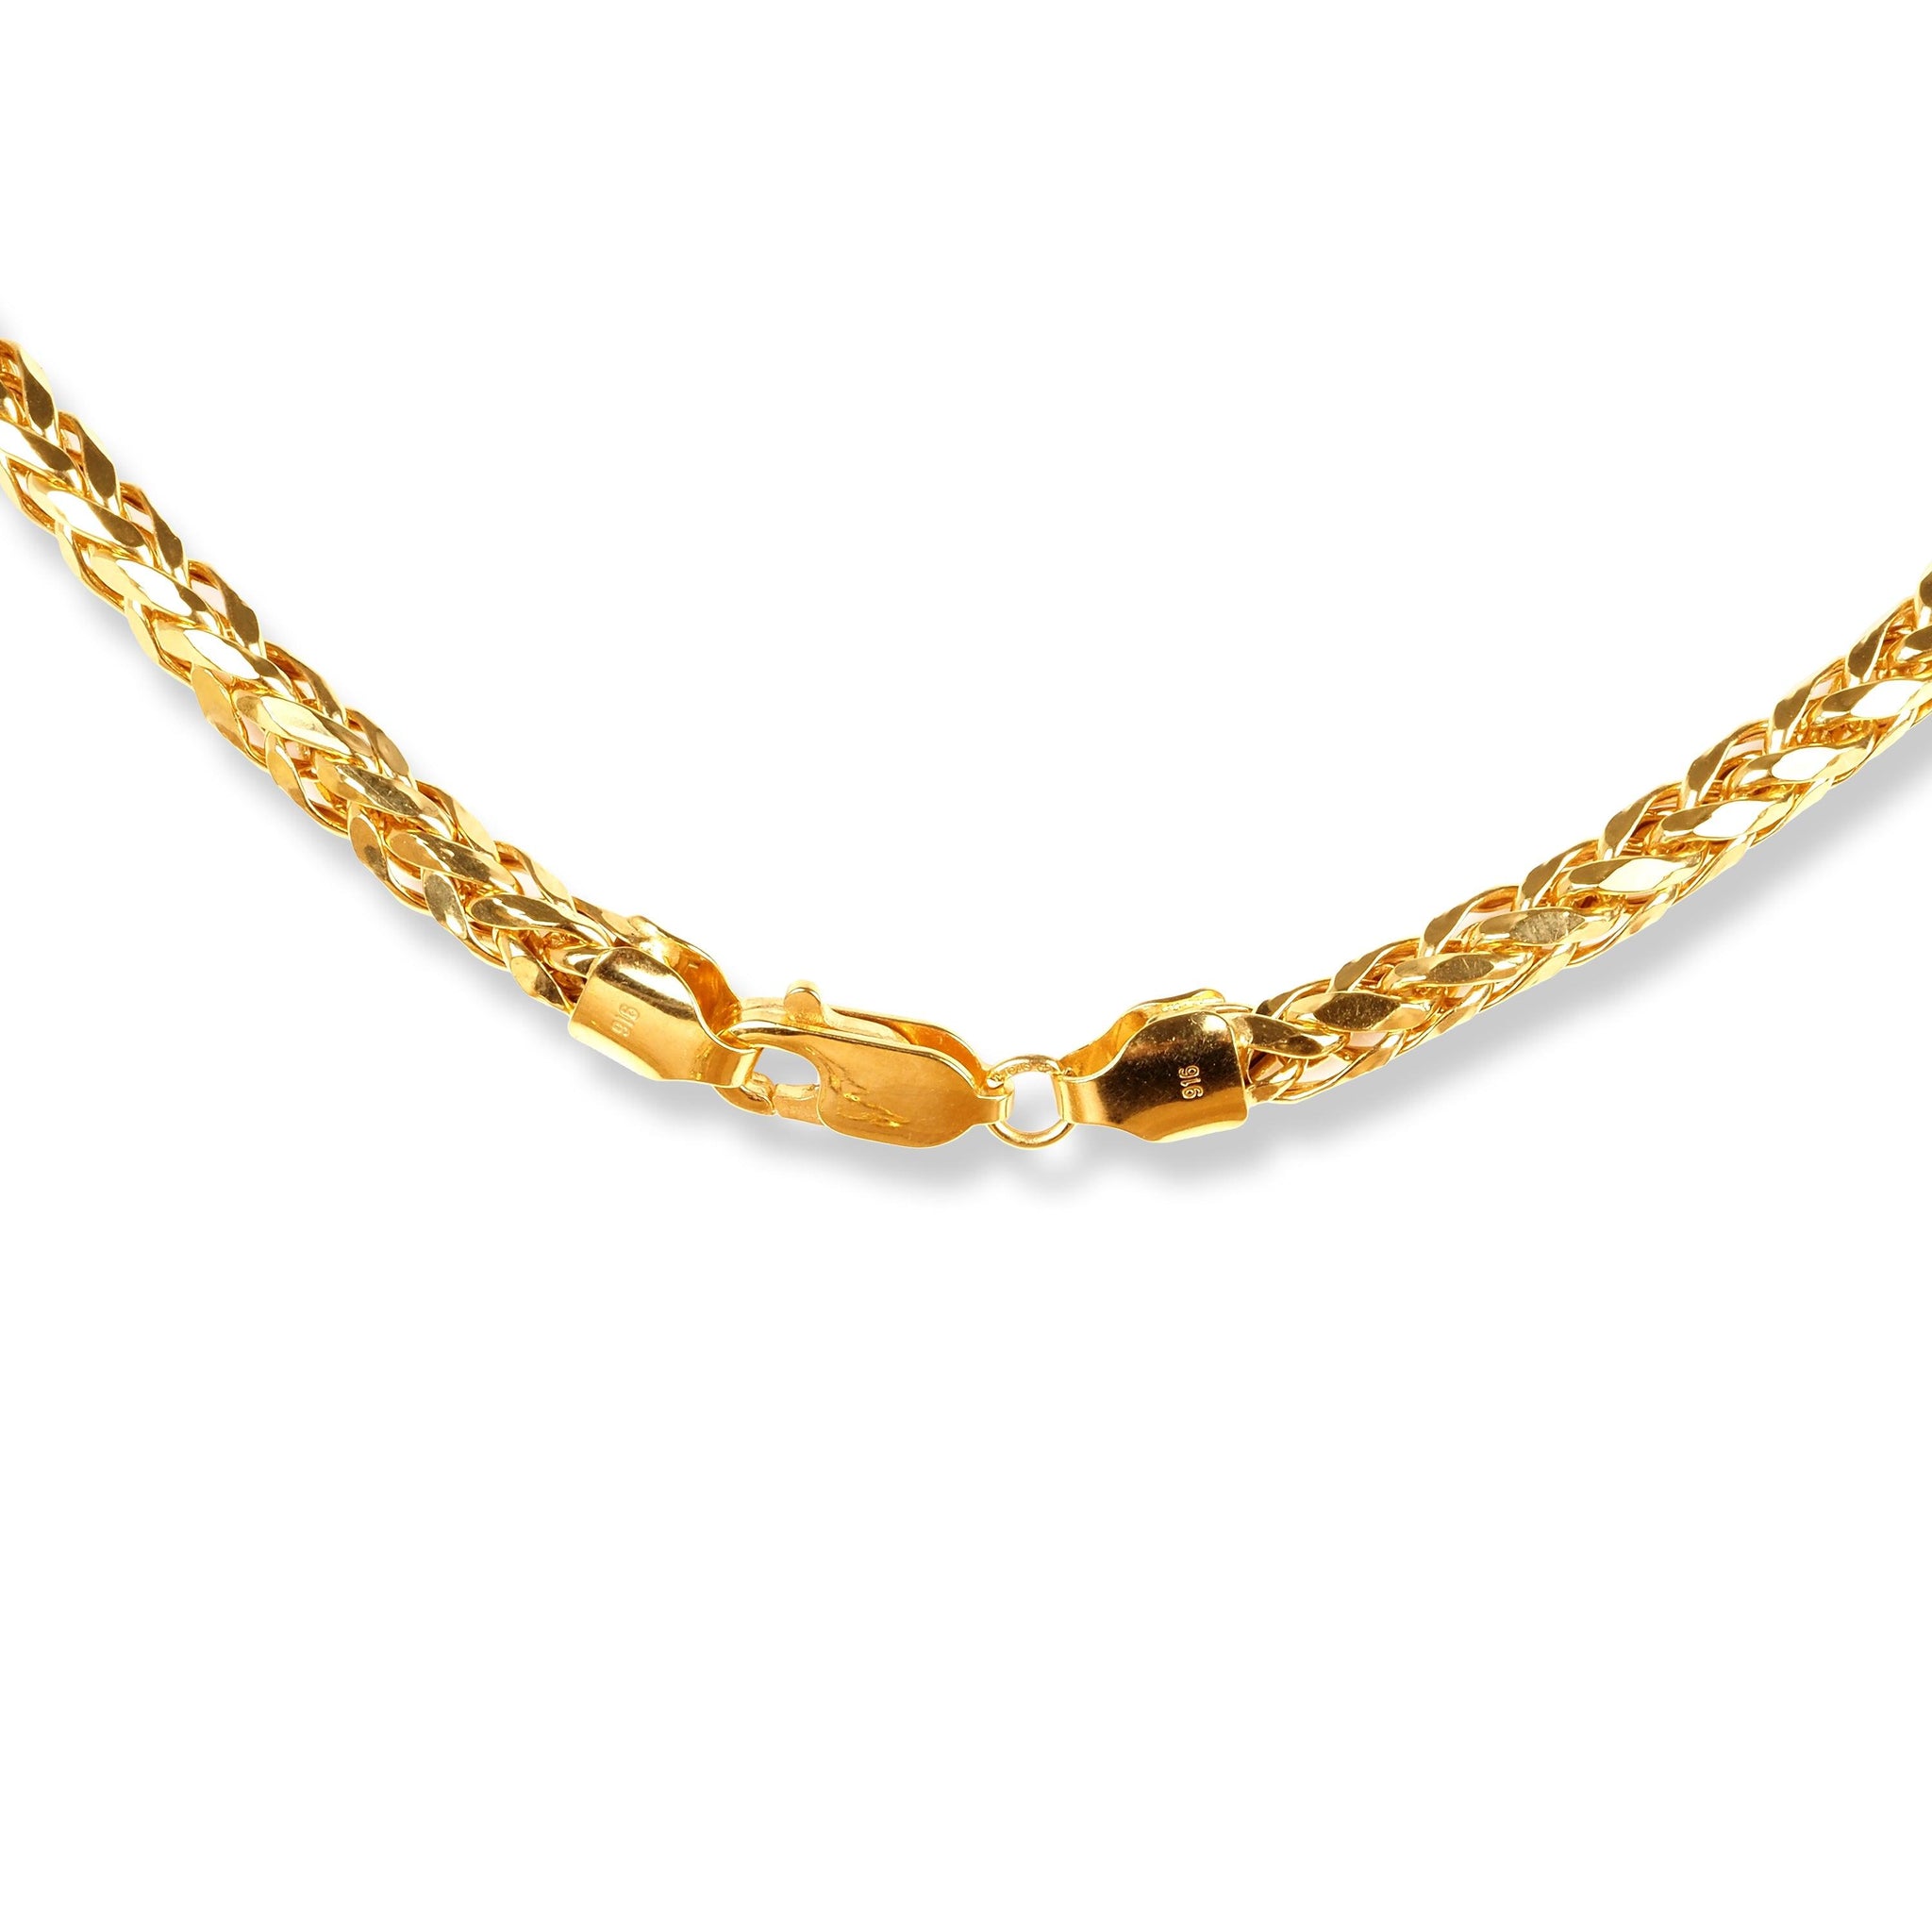 22ct Yellow Gold Filed Spiga Chain With Lobster Clasp C-1219